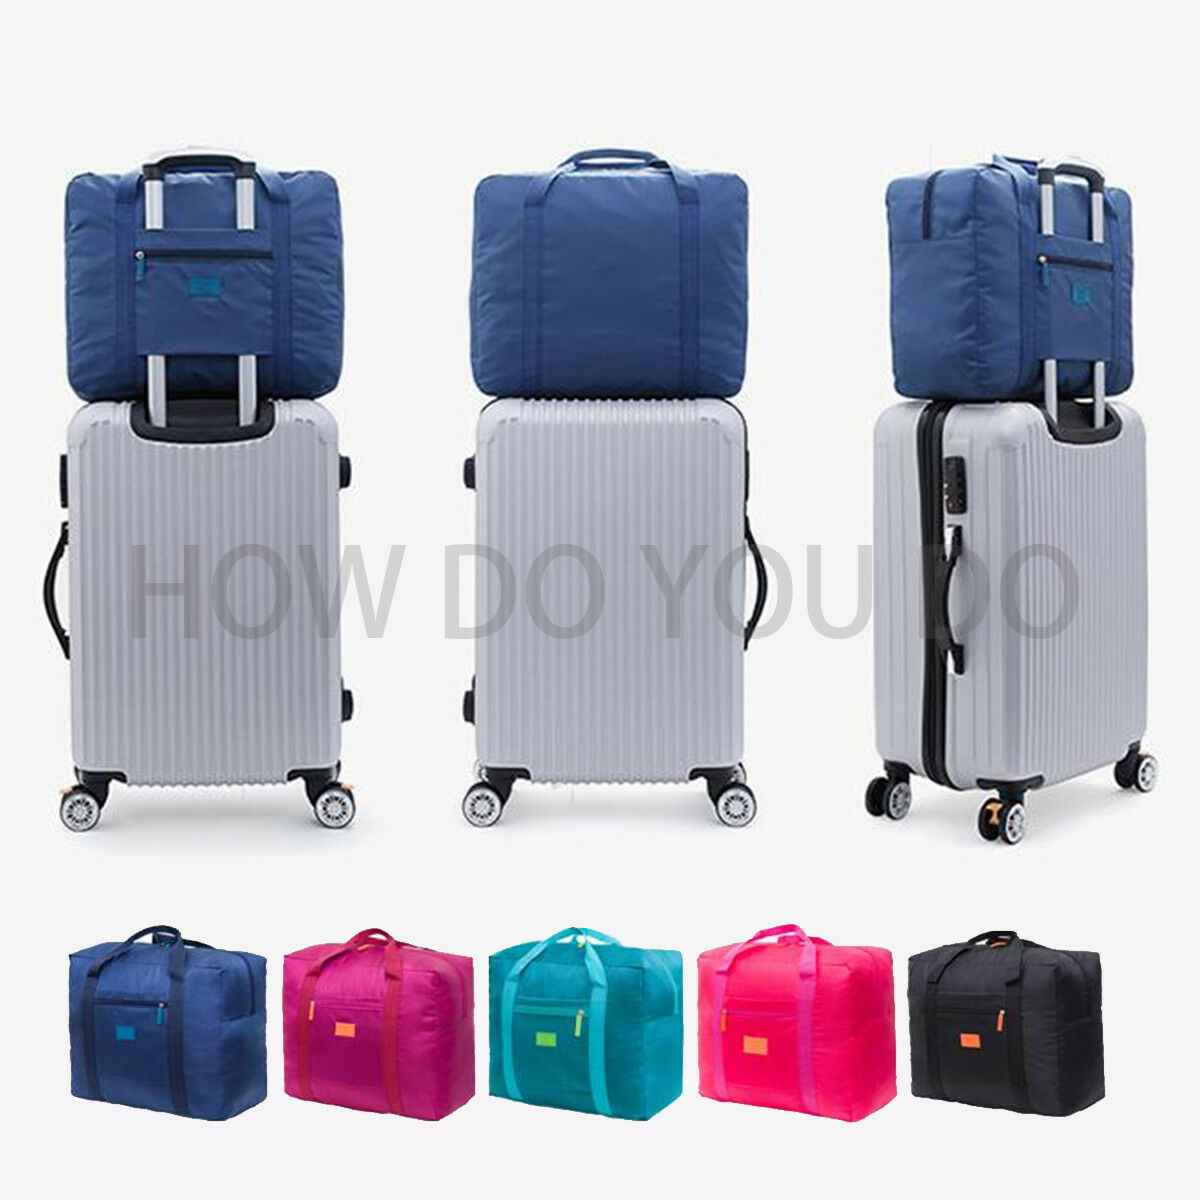 Portable Waterpoof Foldable Travel Luggage Baggage Storage Carry-on Duffle Bag